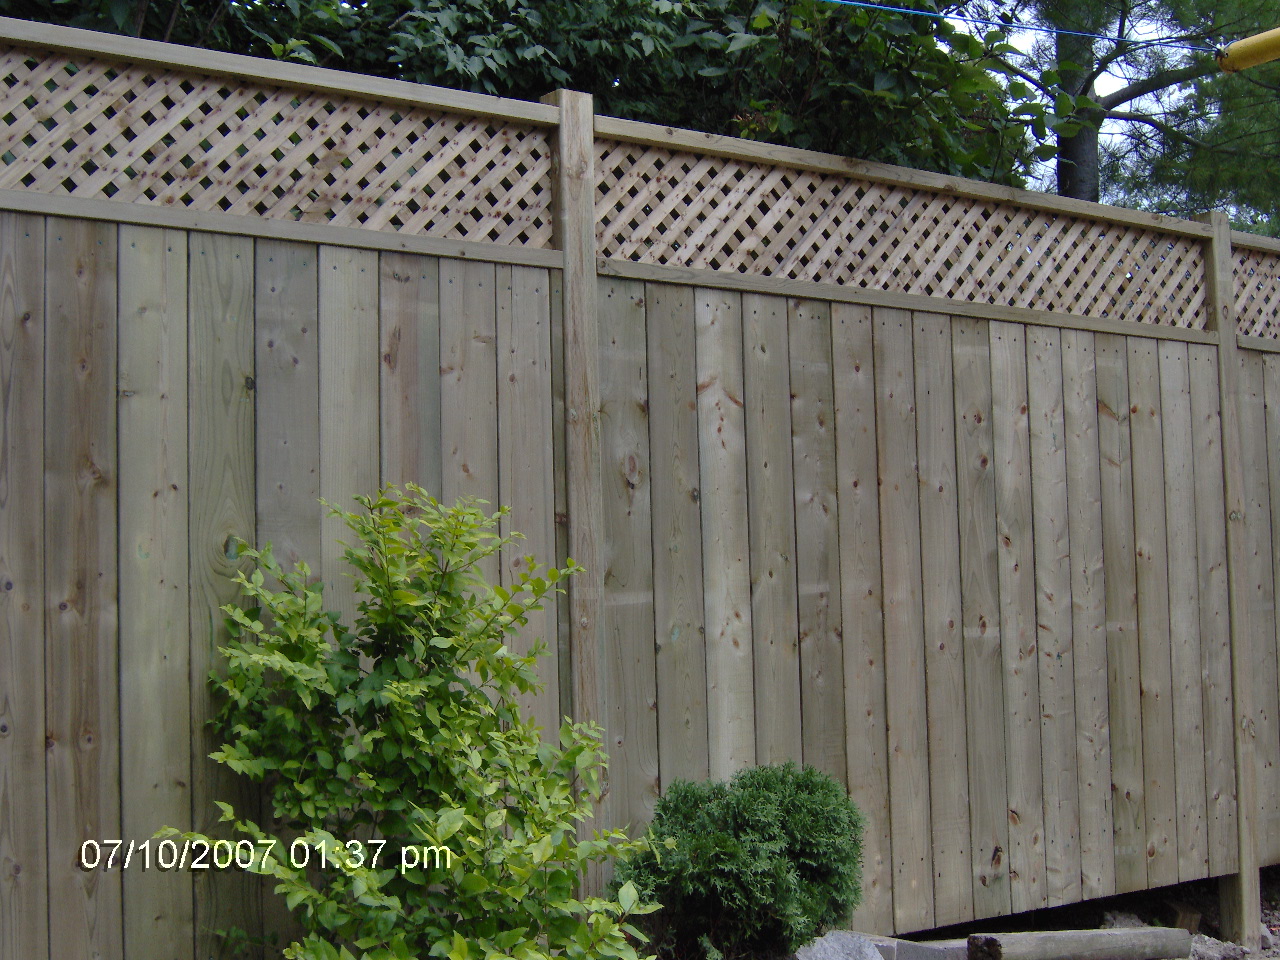 Discover the craftsmanship of Fortress Fencing from Fortress Fencing